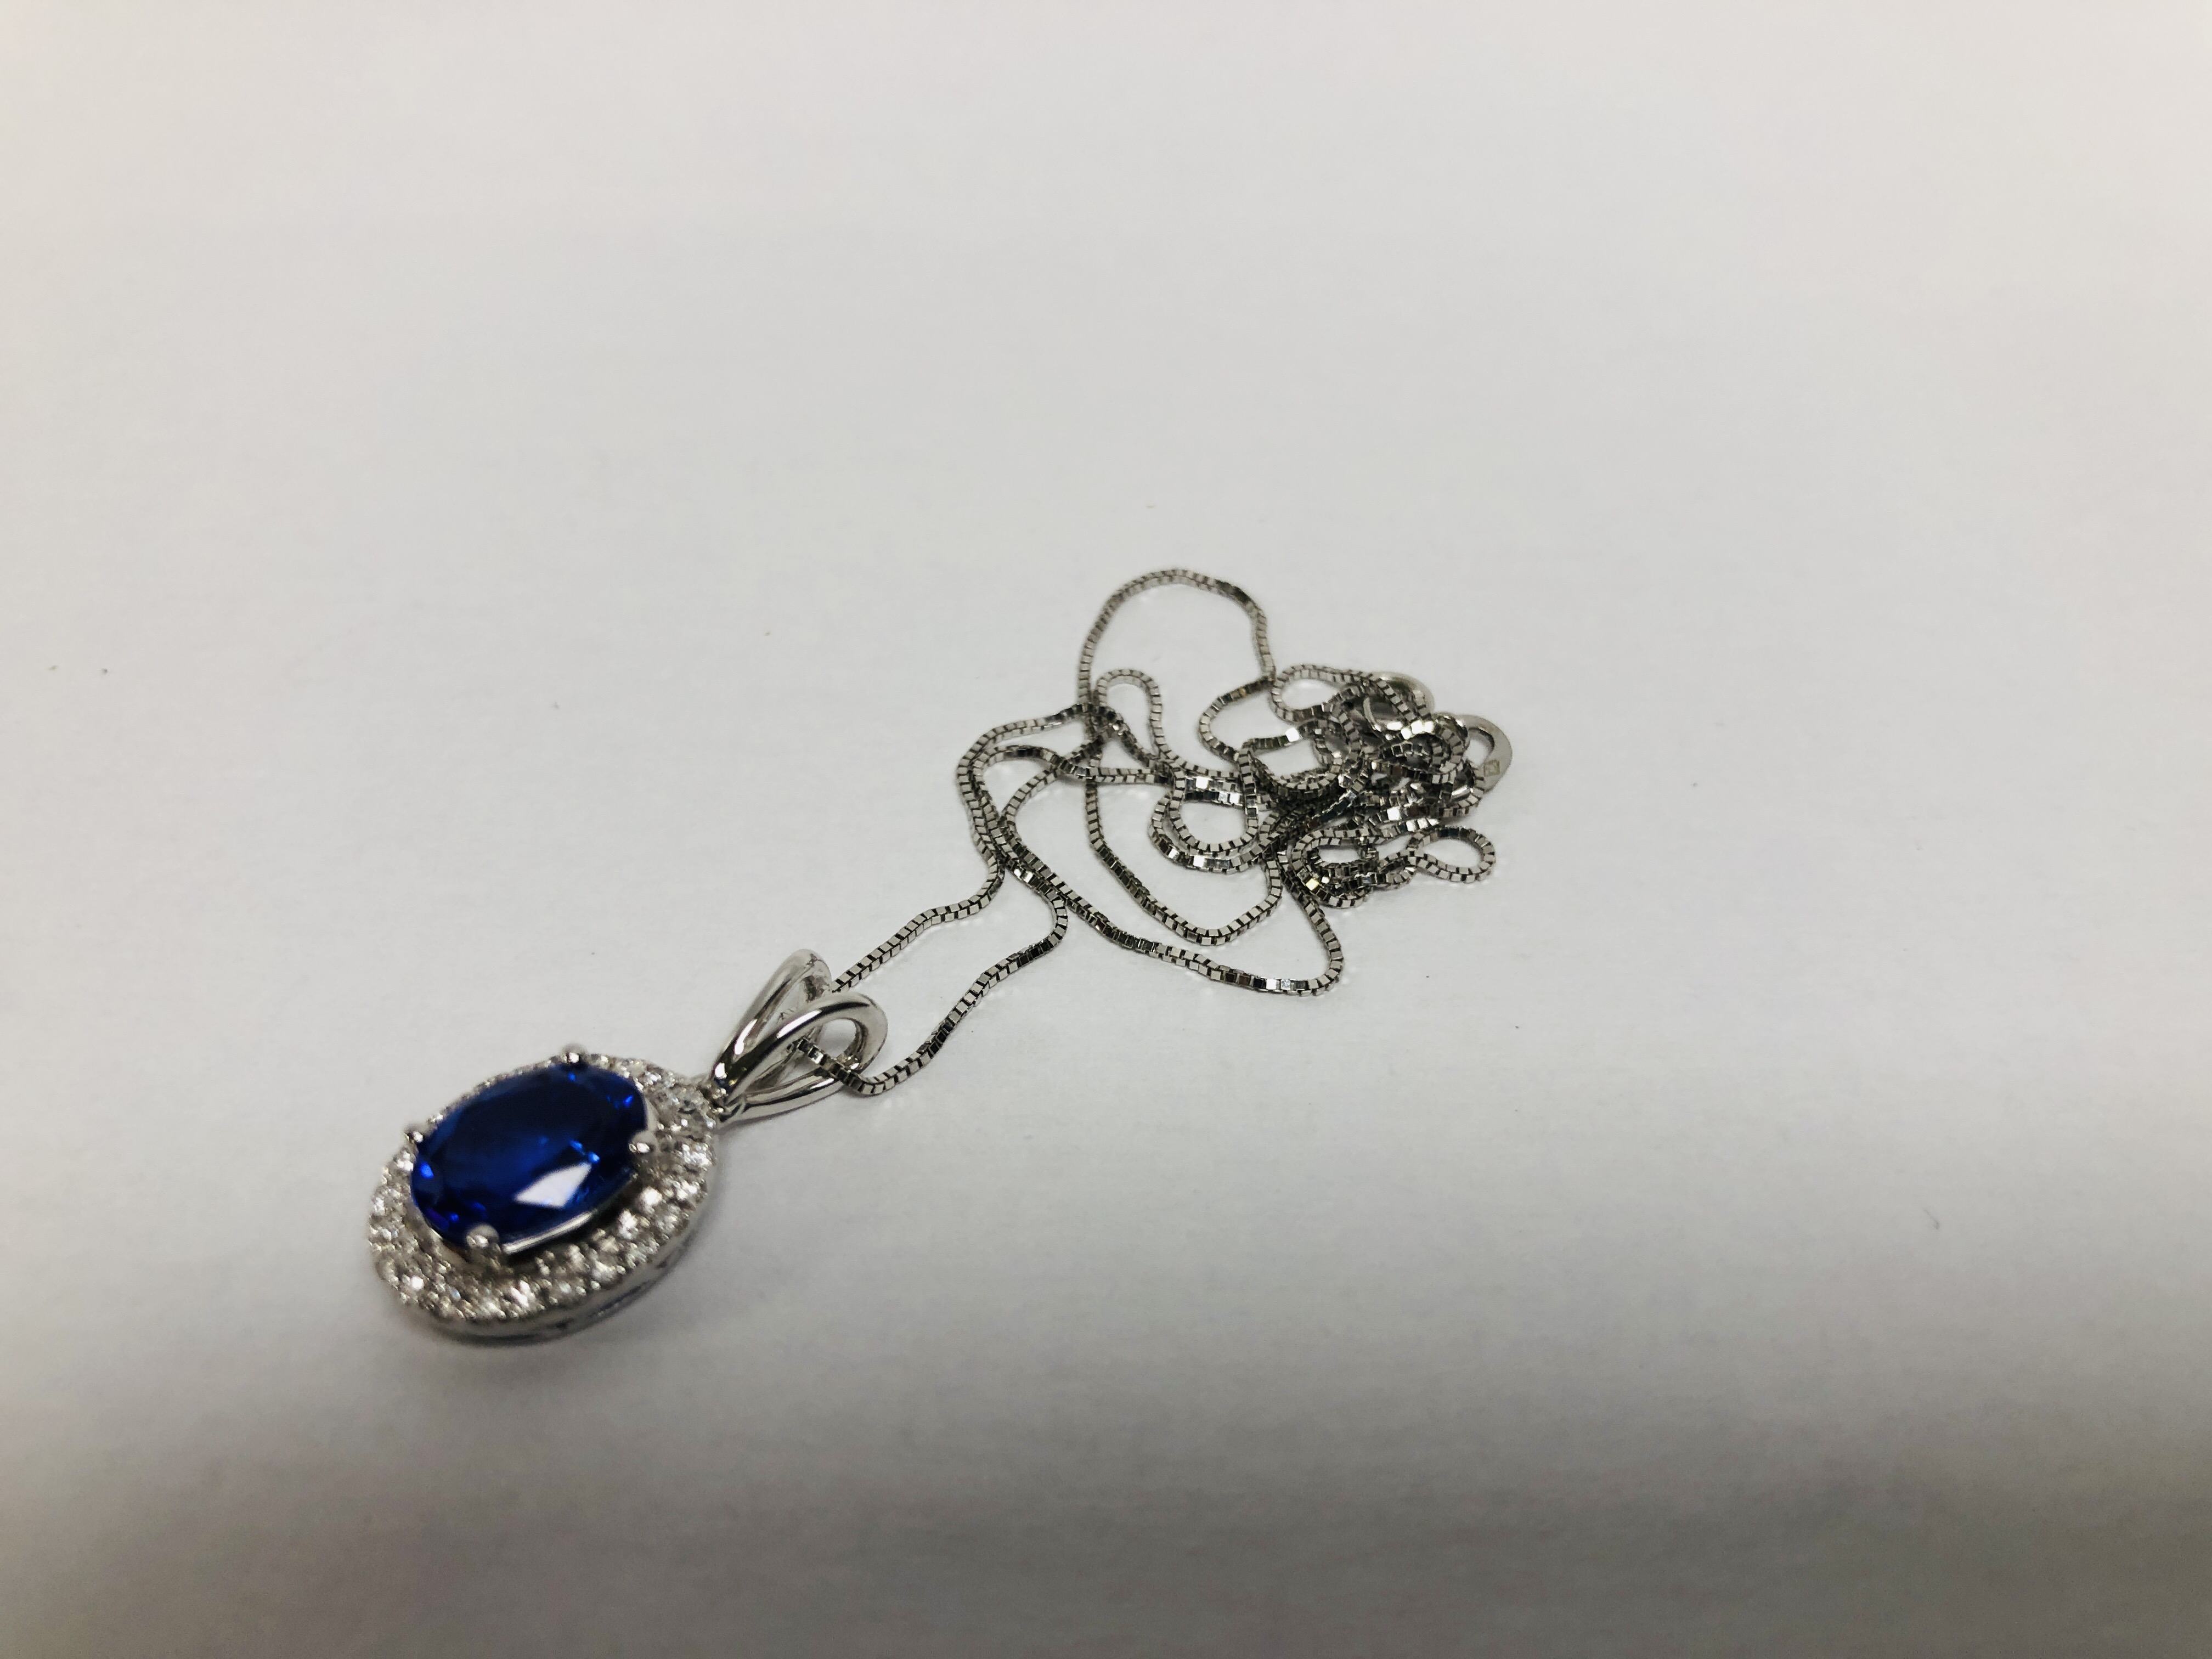 A PENDANT NECKLACE MARKED 750 THE PRINCIPLE BLUE STONE SURROUNDED BY DIAMONDS - Image 4 of 6